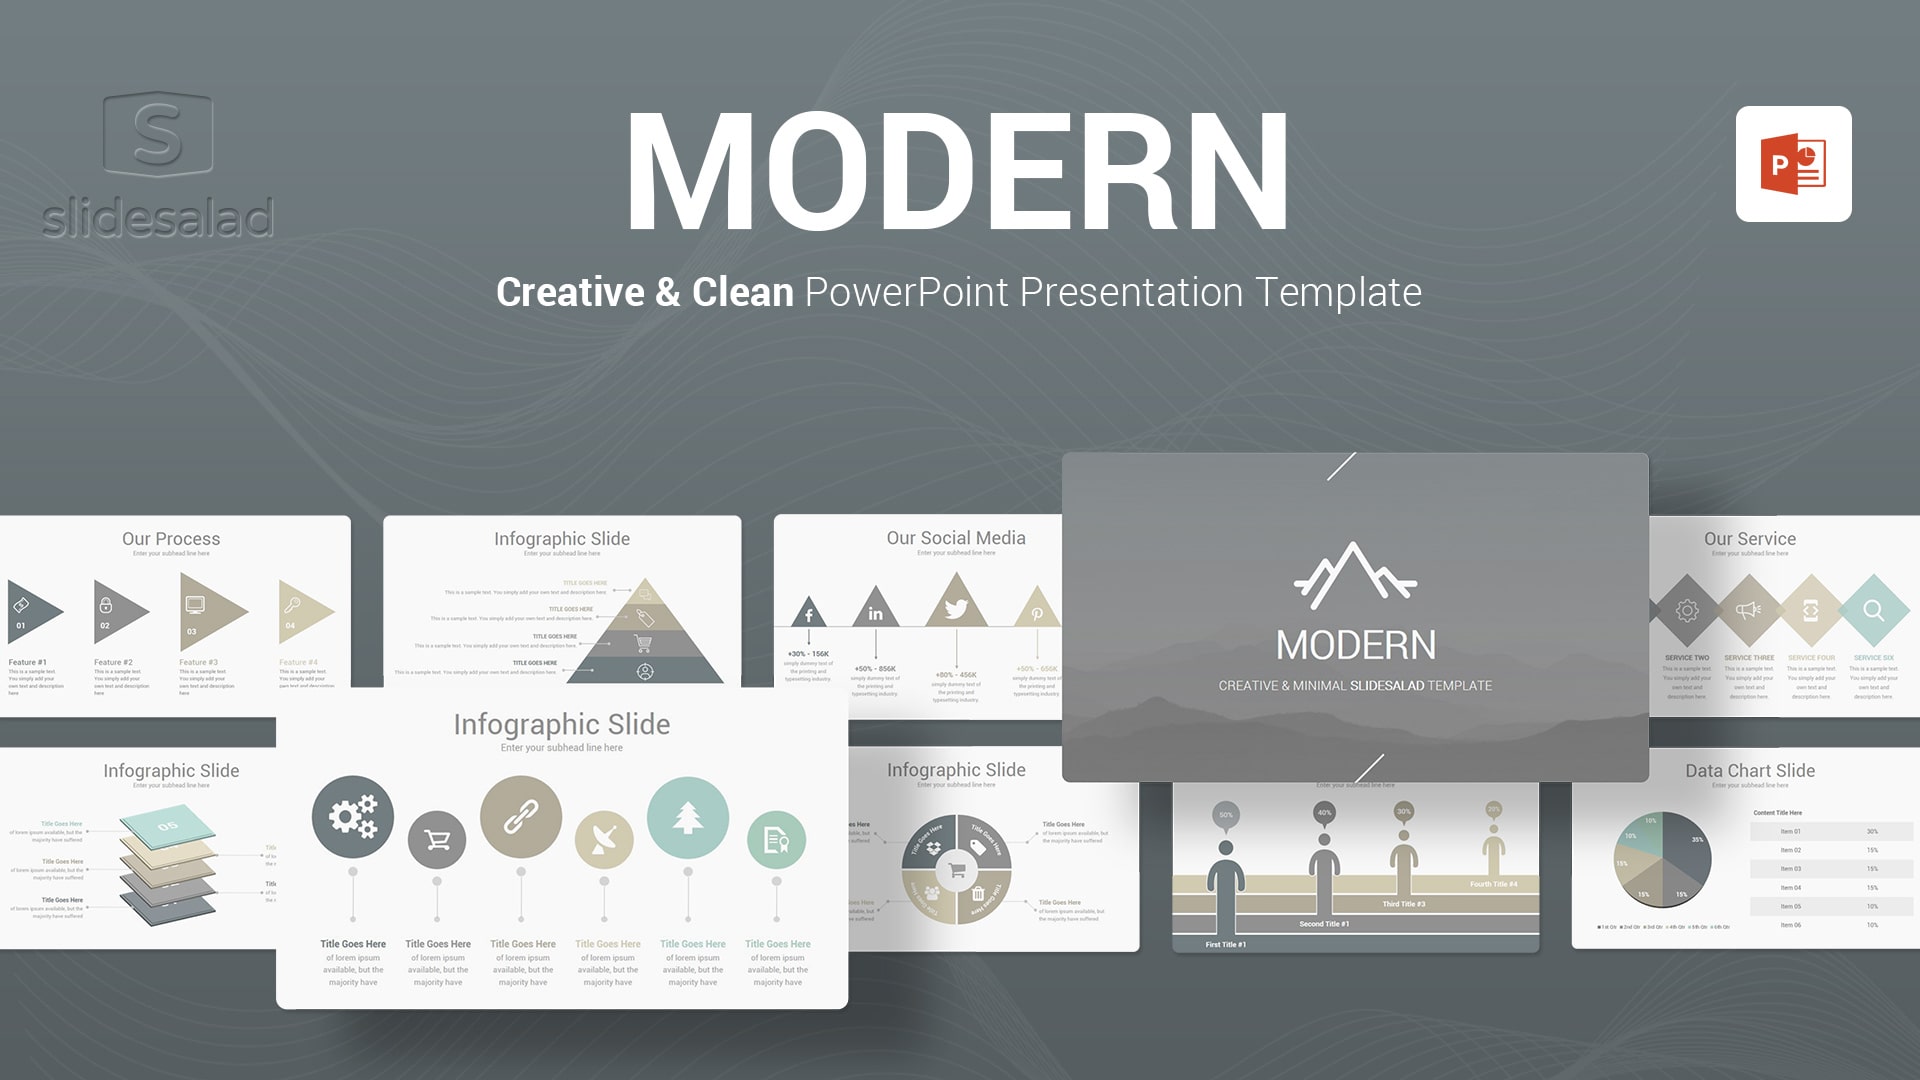 Modern PowerPoint Template for Presentation - Ultimate PowerPoint Template for Professional Presentations